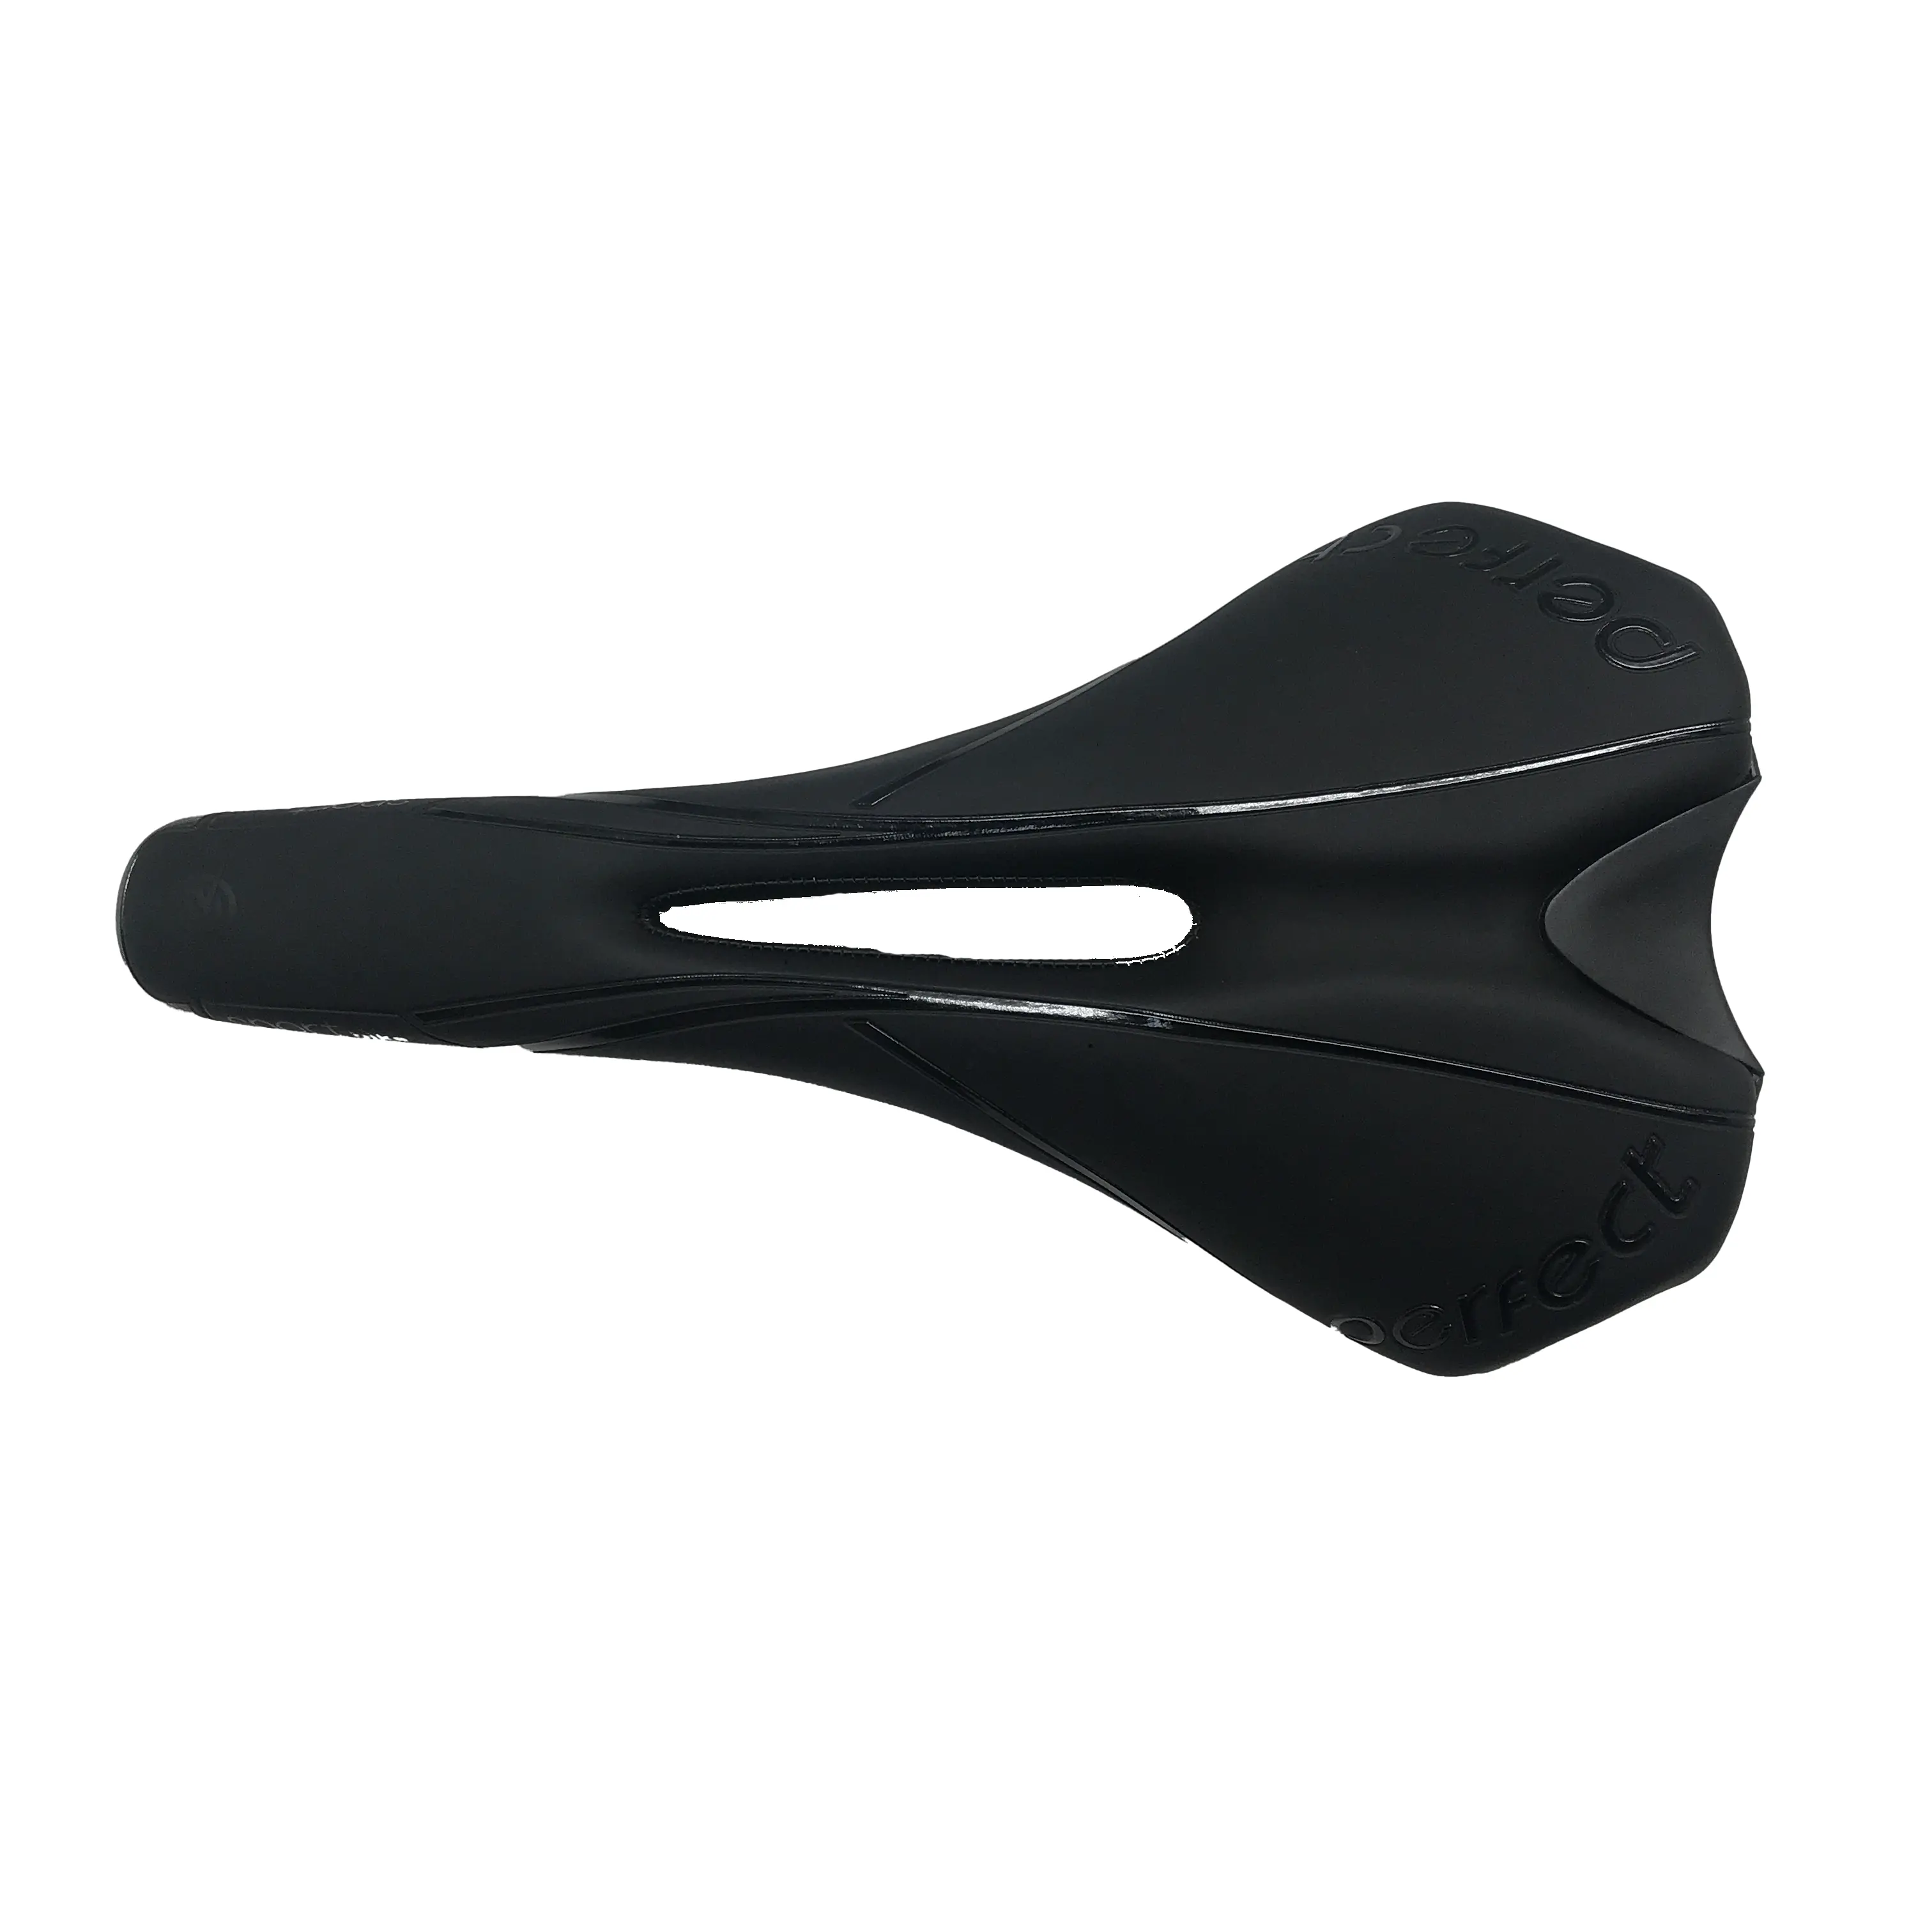 Free Sample Chinese Factory Bike Parts Made of Comfortable Memory Foam Bicycle Seat with Ergonomic Zone Concept For Adult FYSA07